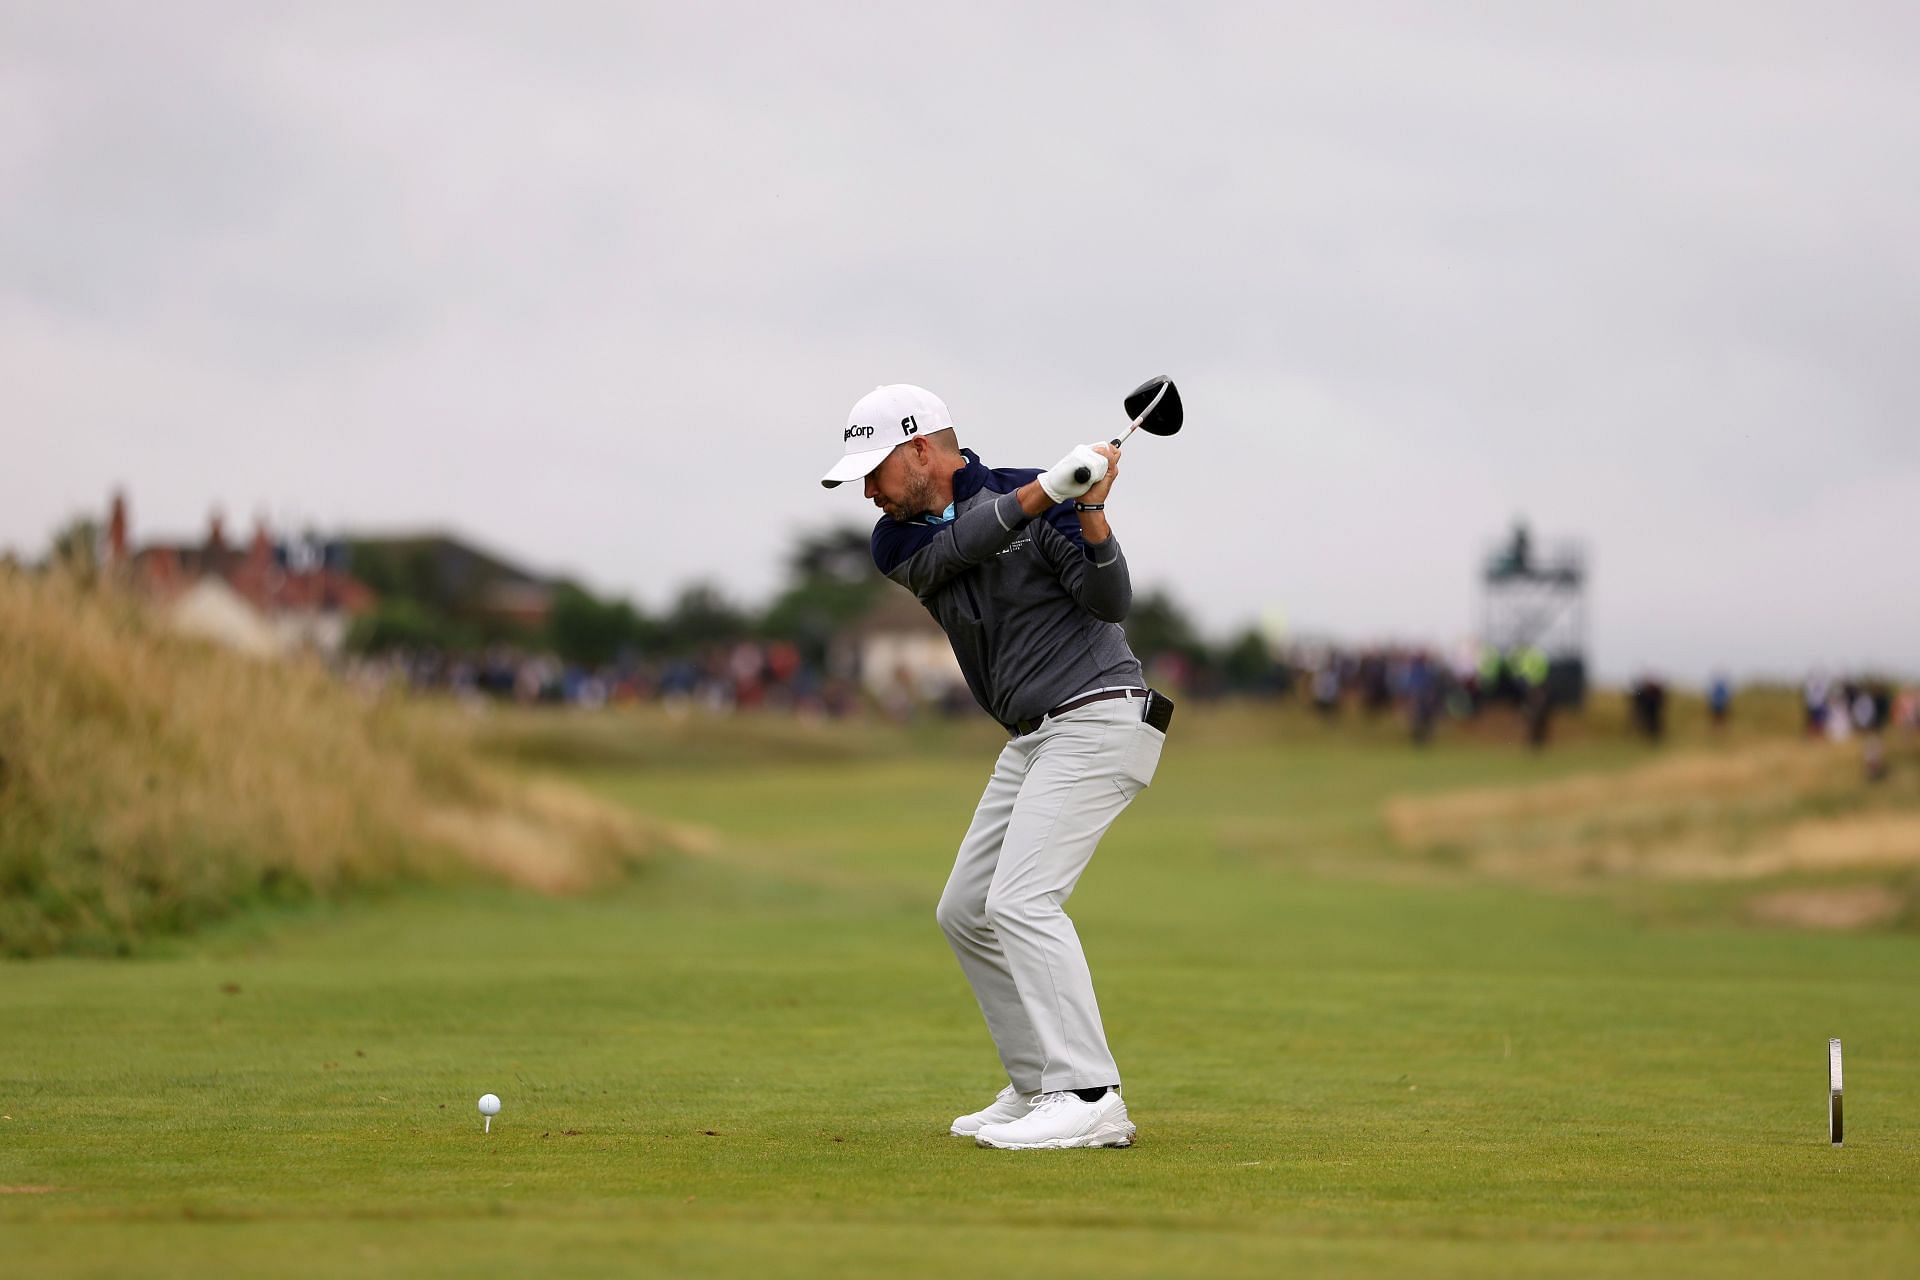 Brian Harman at The British Open (via Getty Images)